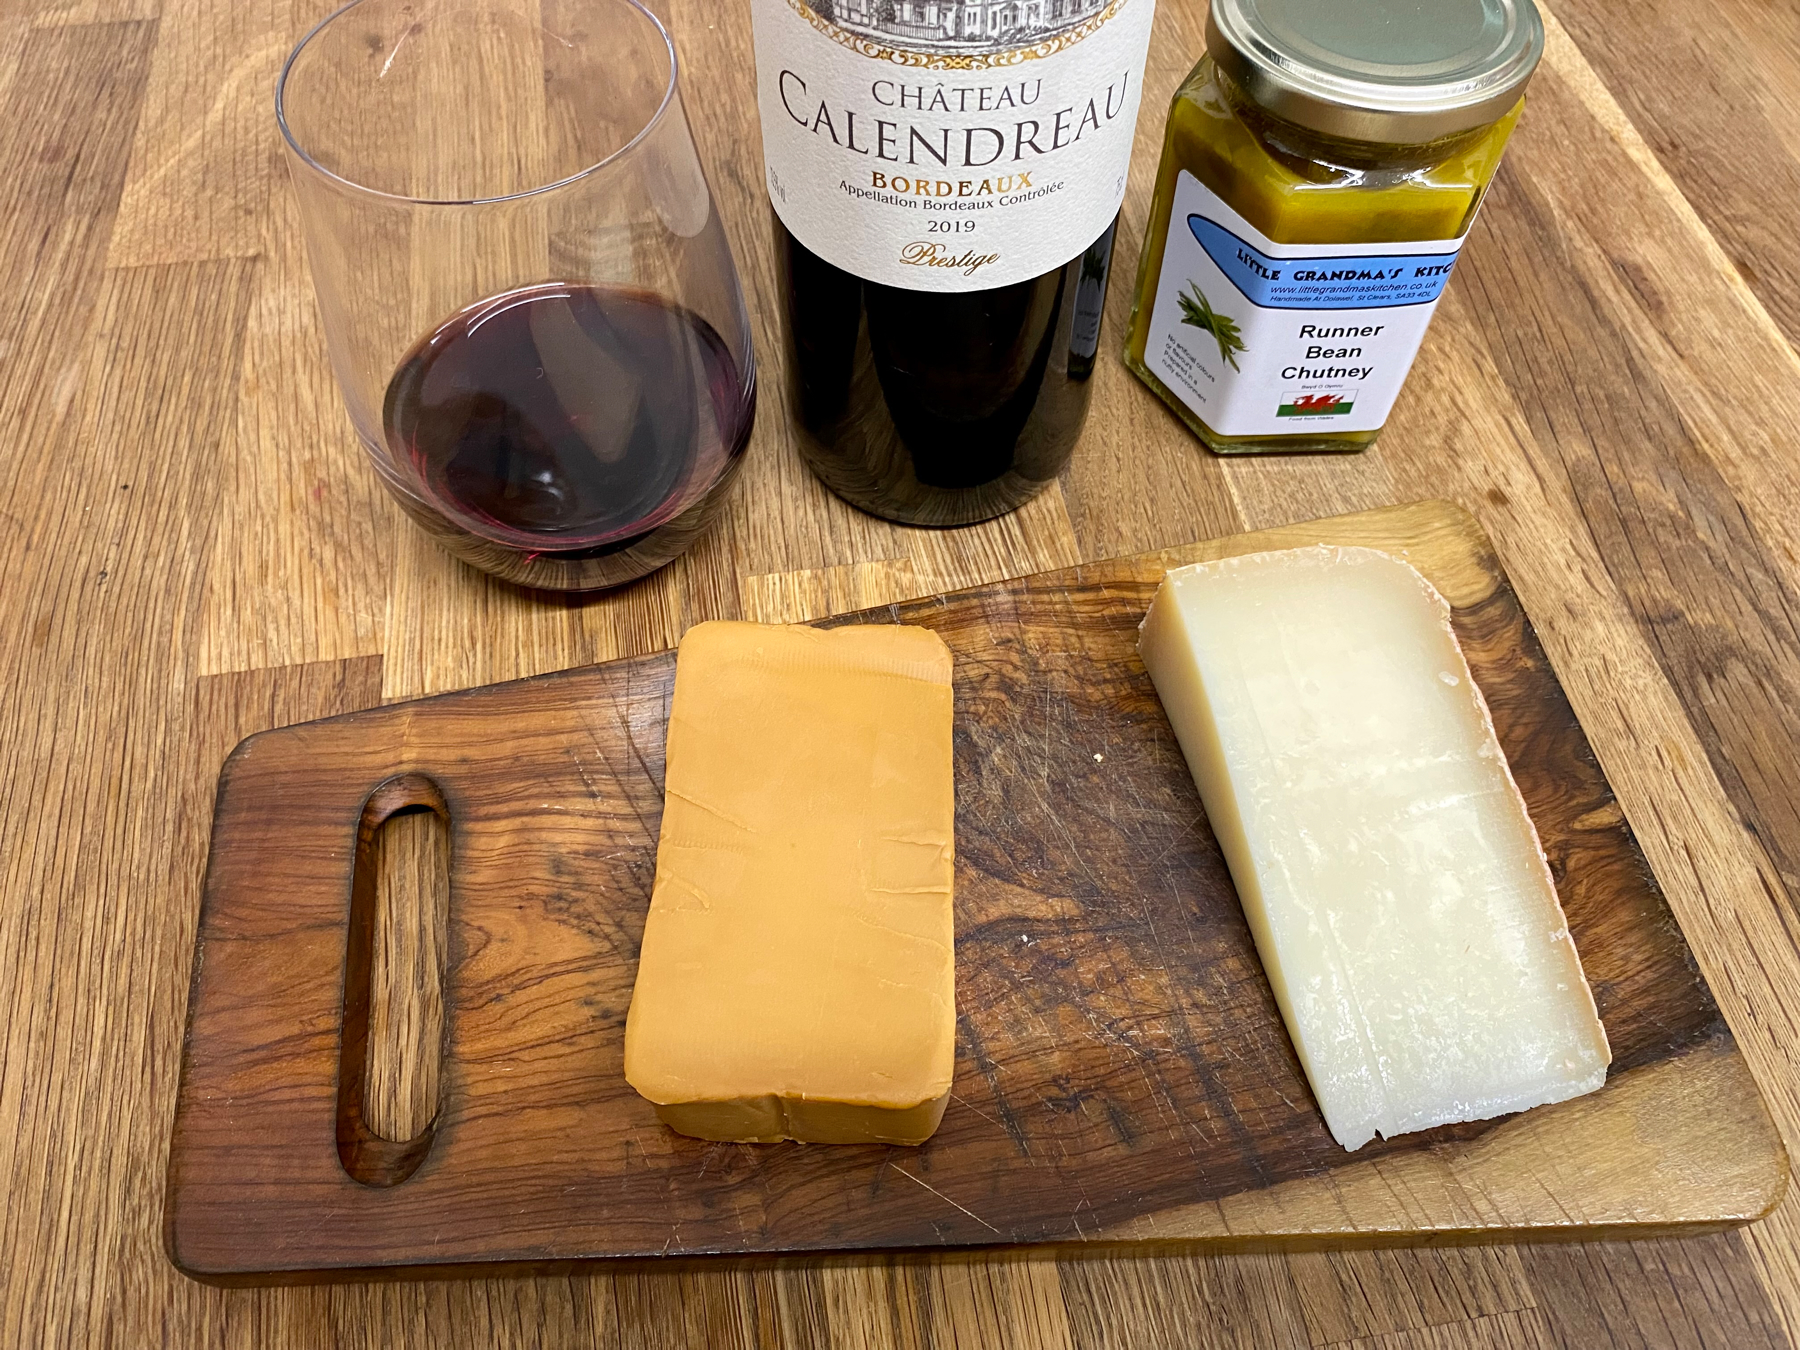 Two blocks of cheese on a wooden board, one of them a caramel brown colour. Red wine and chutney in the background.